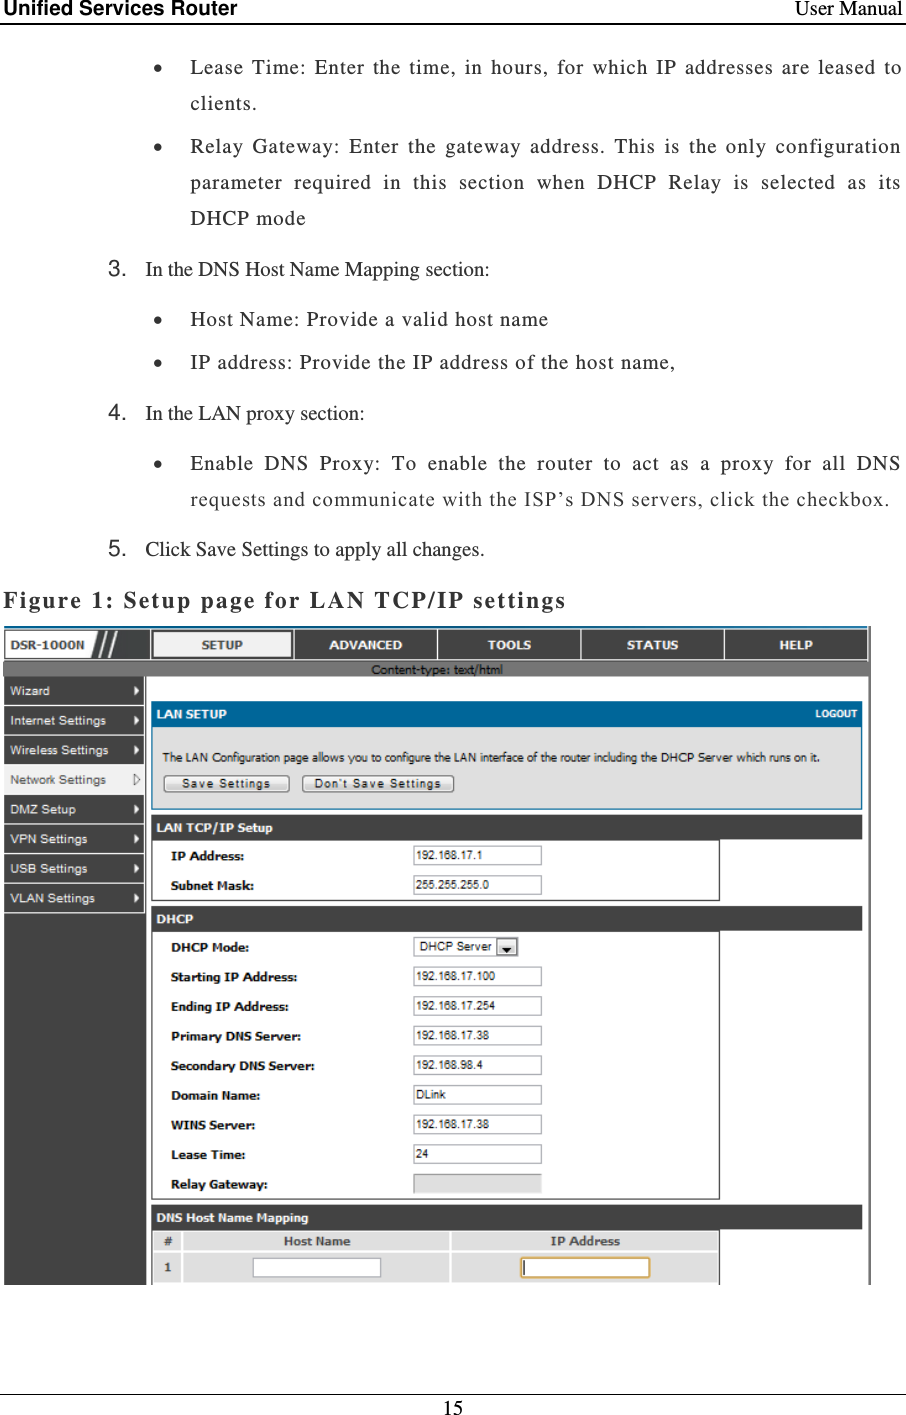 Unified Services Router    User Manual 15   Lease  Time:  Enter  the  time,  in  hours,  for  which  IP  addresses  are  leased  to clients.  Relay  Gateway:  Enter  the  gateway  address.  This  is  the  only  configuration parameter  required  in  this  section  when  DHCP  Relay  is  selected  as  its DHCP mode 3. In the DNS Host Name Mapping section:  Host Name: Provide a valid host name  IP address: Provide the IP address of the host name, 4. In the LAN proxy section:  Enable  DNS  Proxy:  To  enable  the  router  to  act  as  a  proxy  for  all  DNS requests and communicate with the ISP’s DNS servers, click the checkbox.  5. Click Save Settings to apply all changes. Figure 1: Setup page f or LAN TCP/ IP  settings   